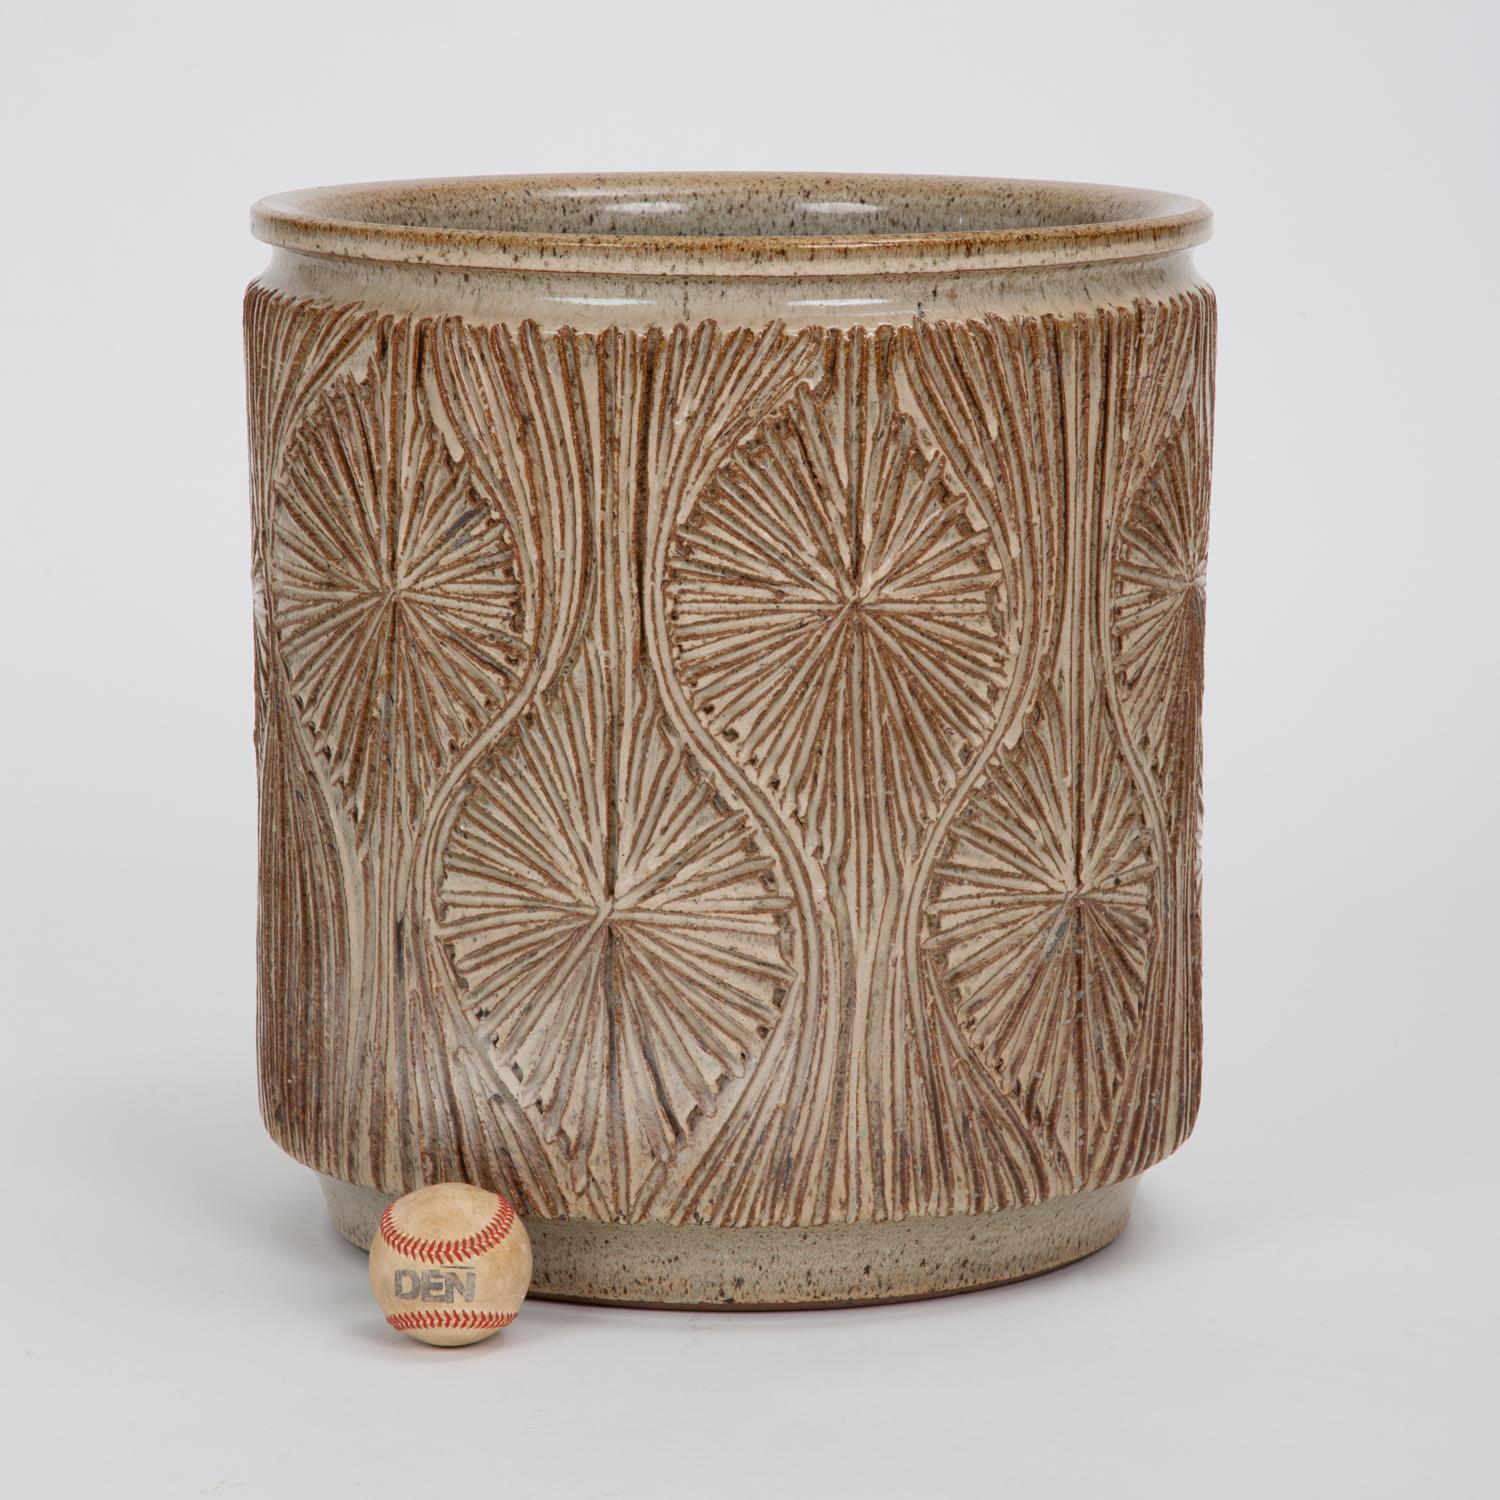 A cylindrical planter from Earthgender, David Cressey and Robert Maxwell’s early 1970s project. This example is incised in the “Teardrop Sunburst” design with interlocking curved gestures separating a pattern of lines radiating from a central point.